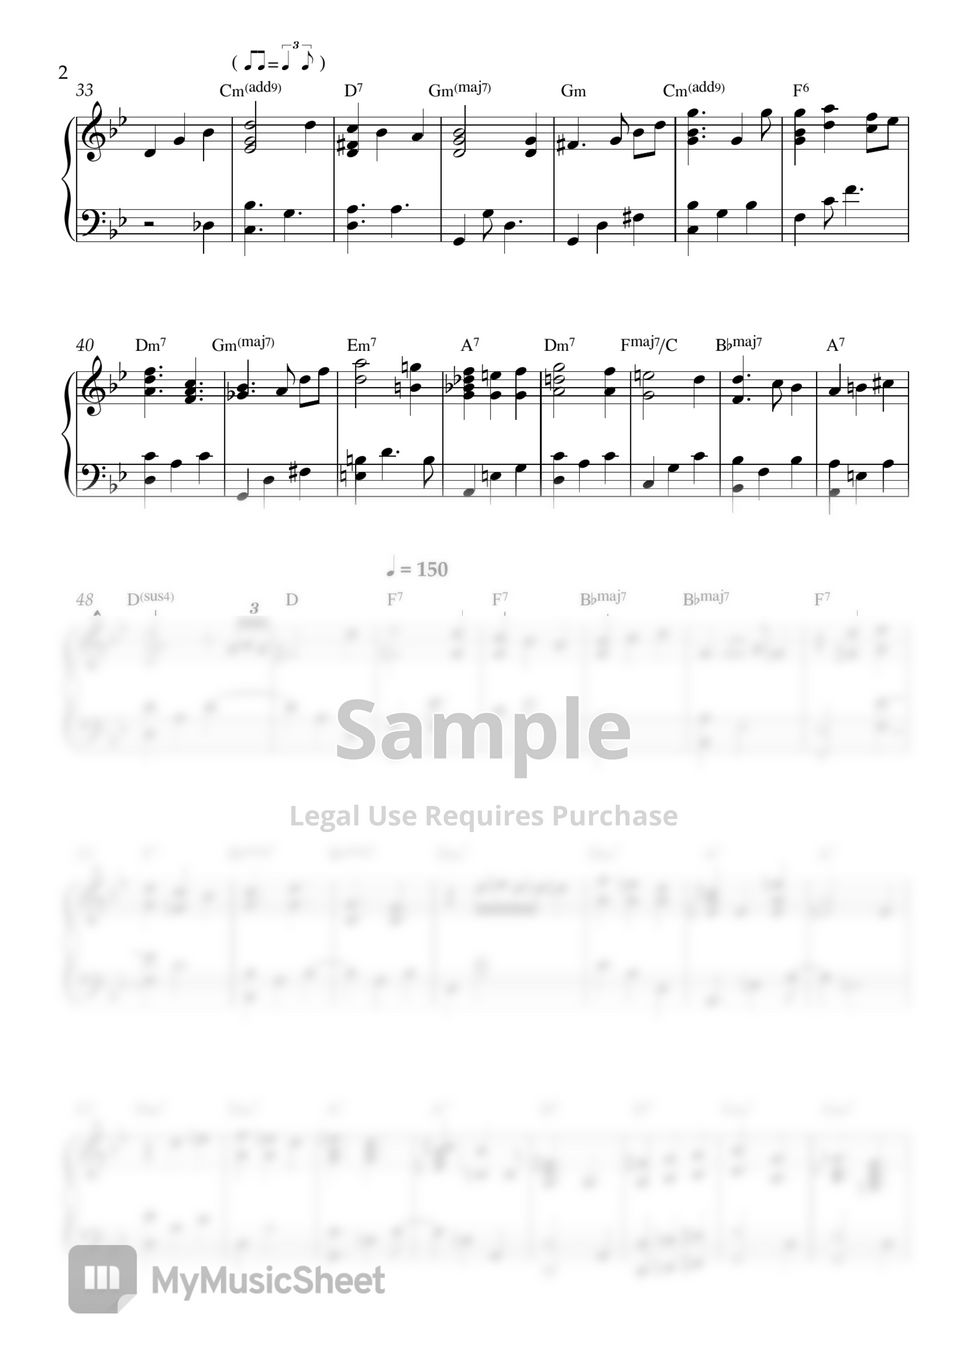 Howl's moving castle OST - Merry go round of life Sheets by QBIC